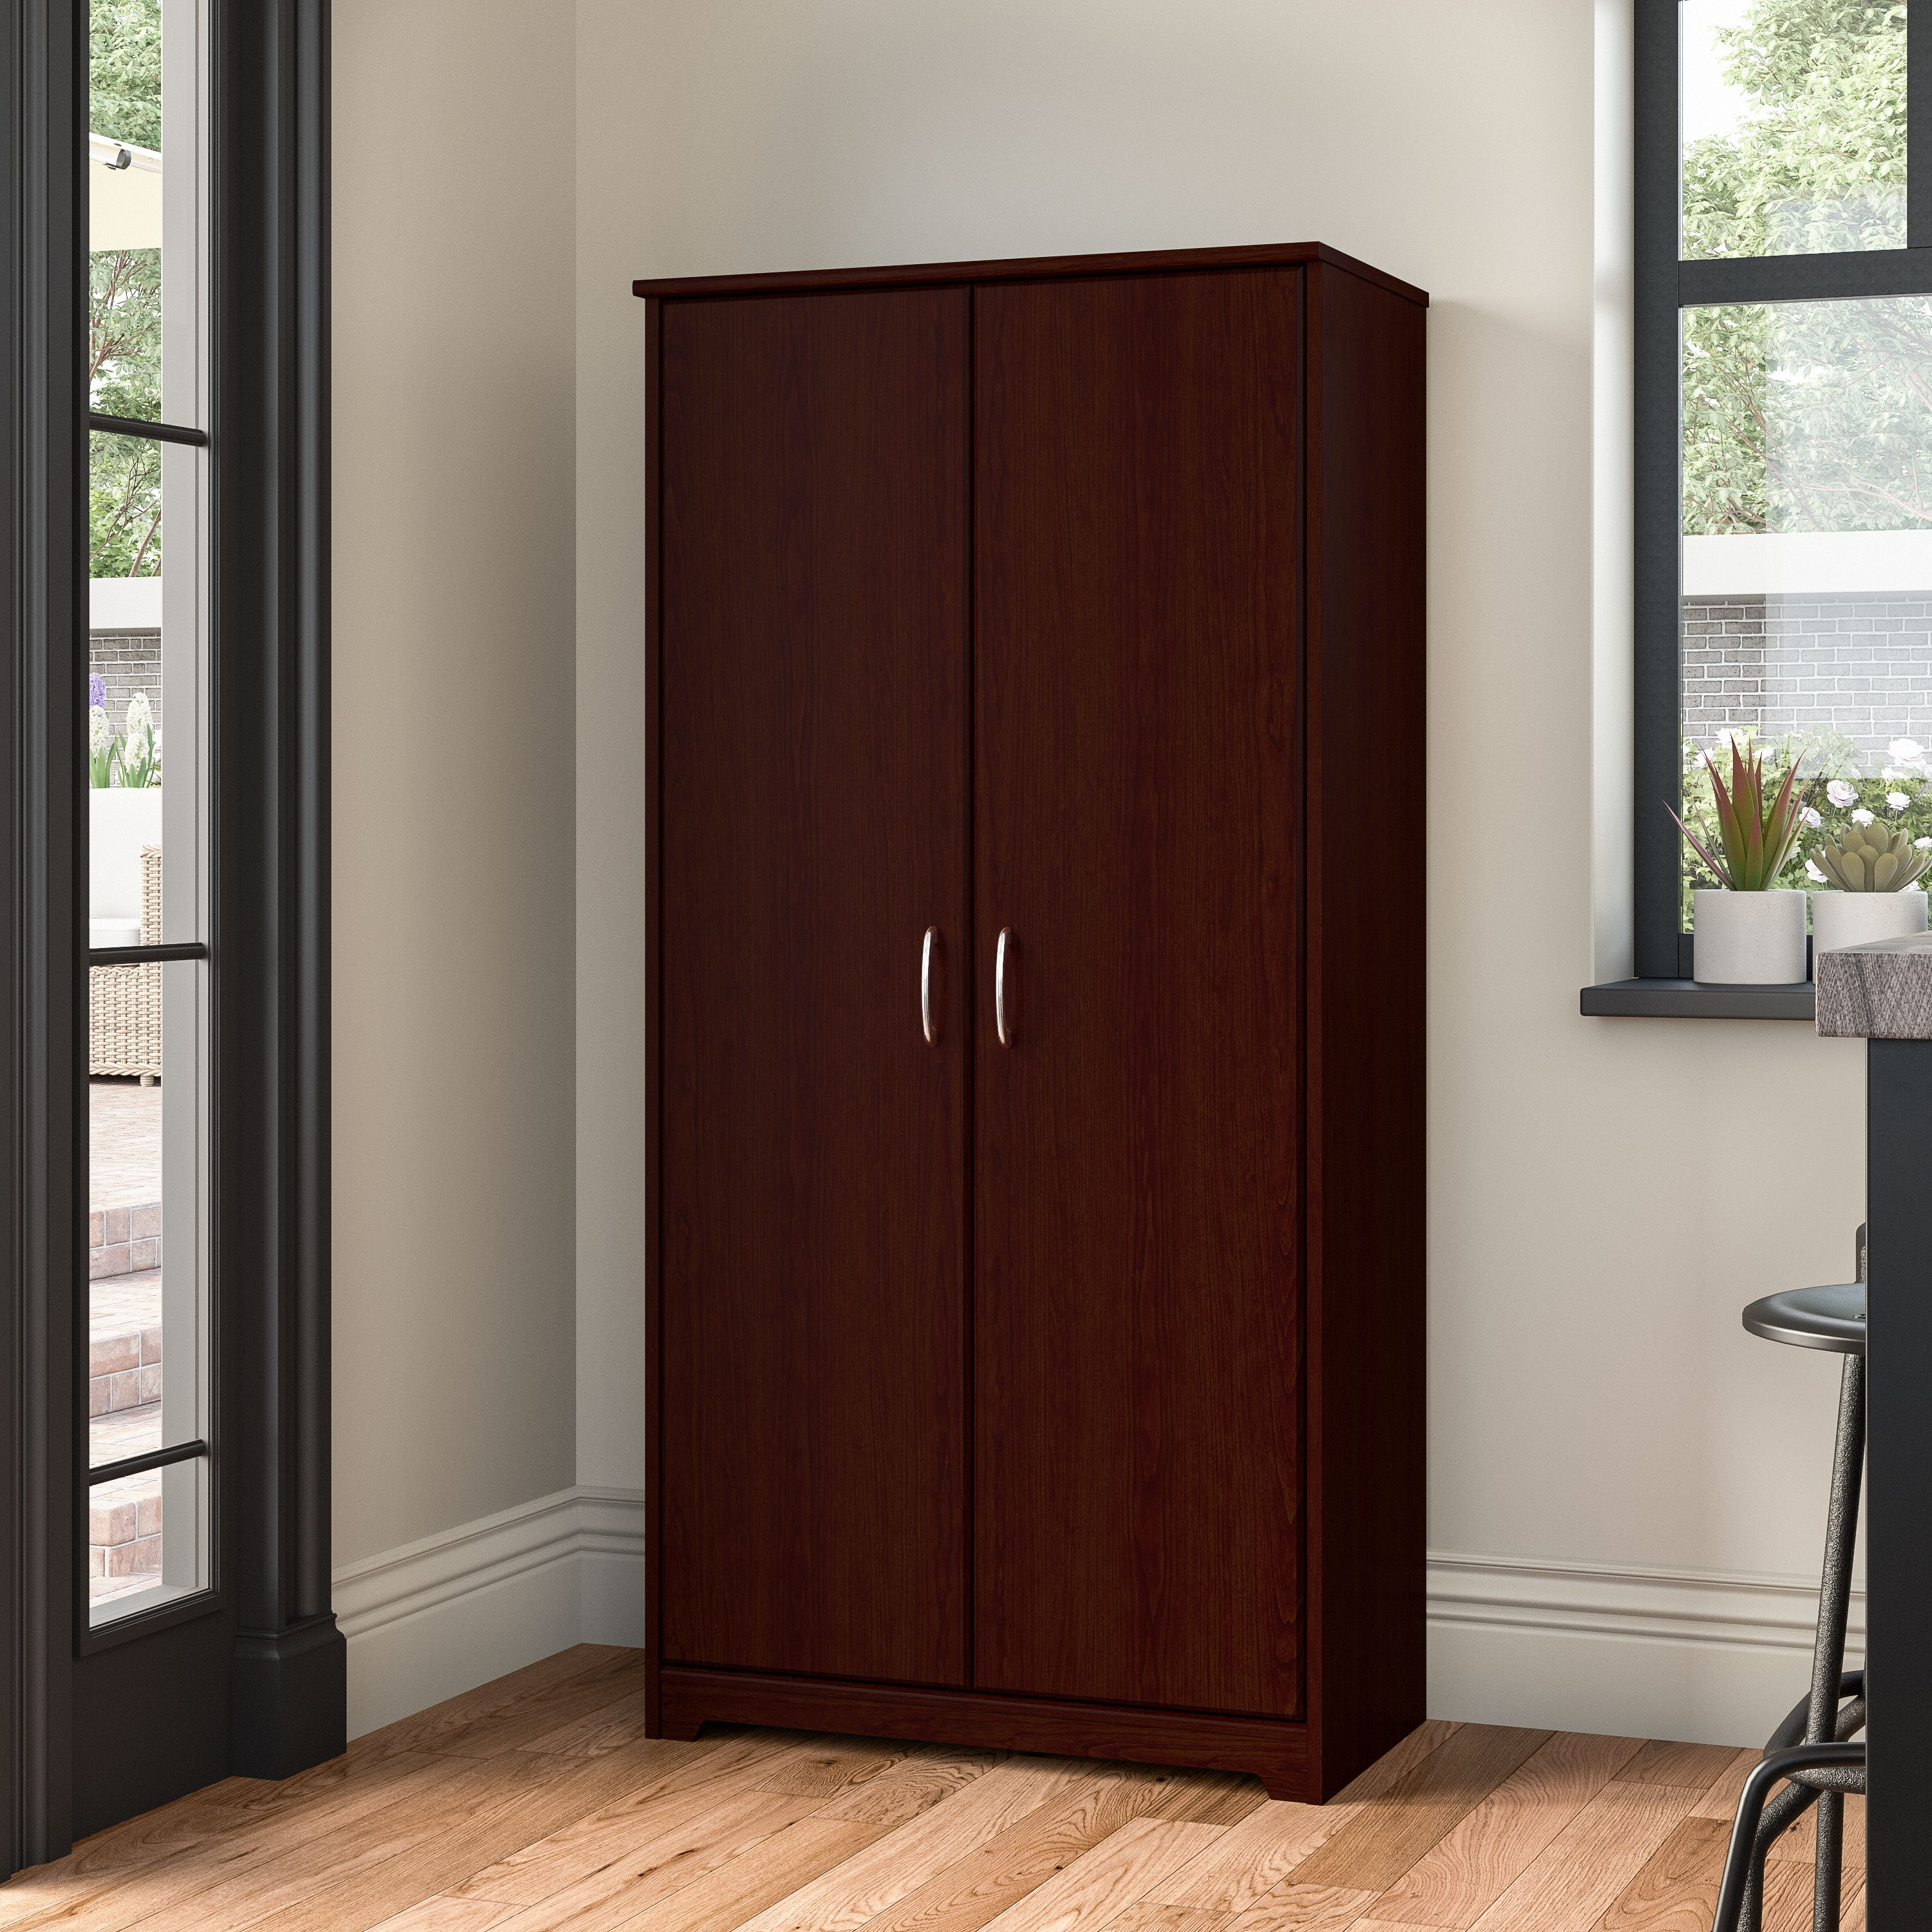 Shop Bush Furniture Cabot Tall Kitchen Pantry Cabinet with Doors 01 WC31499-Z #color_harvest cherry